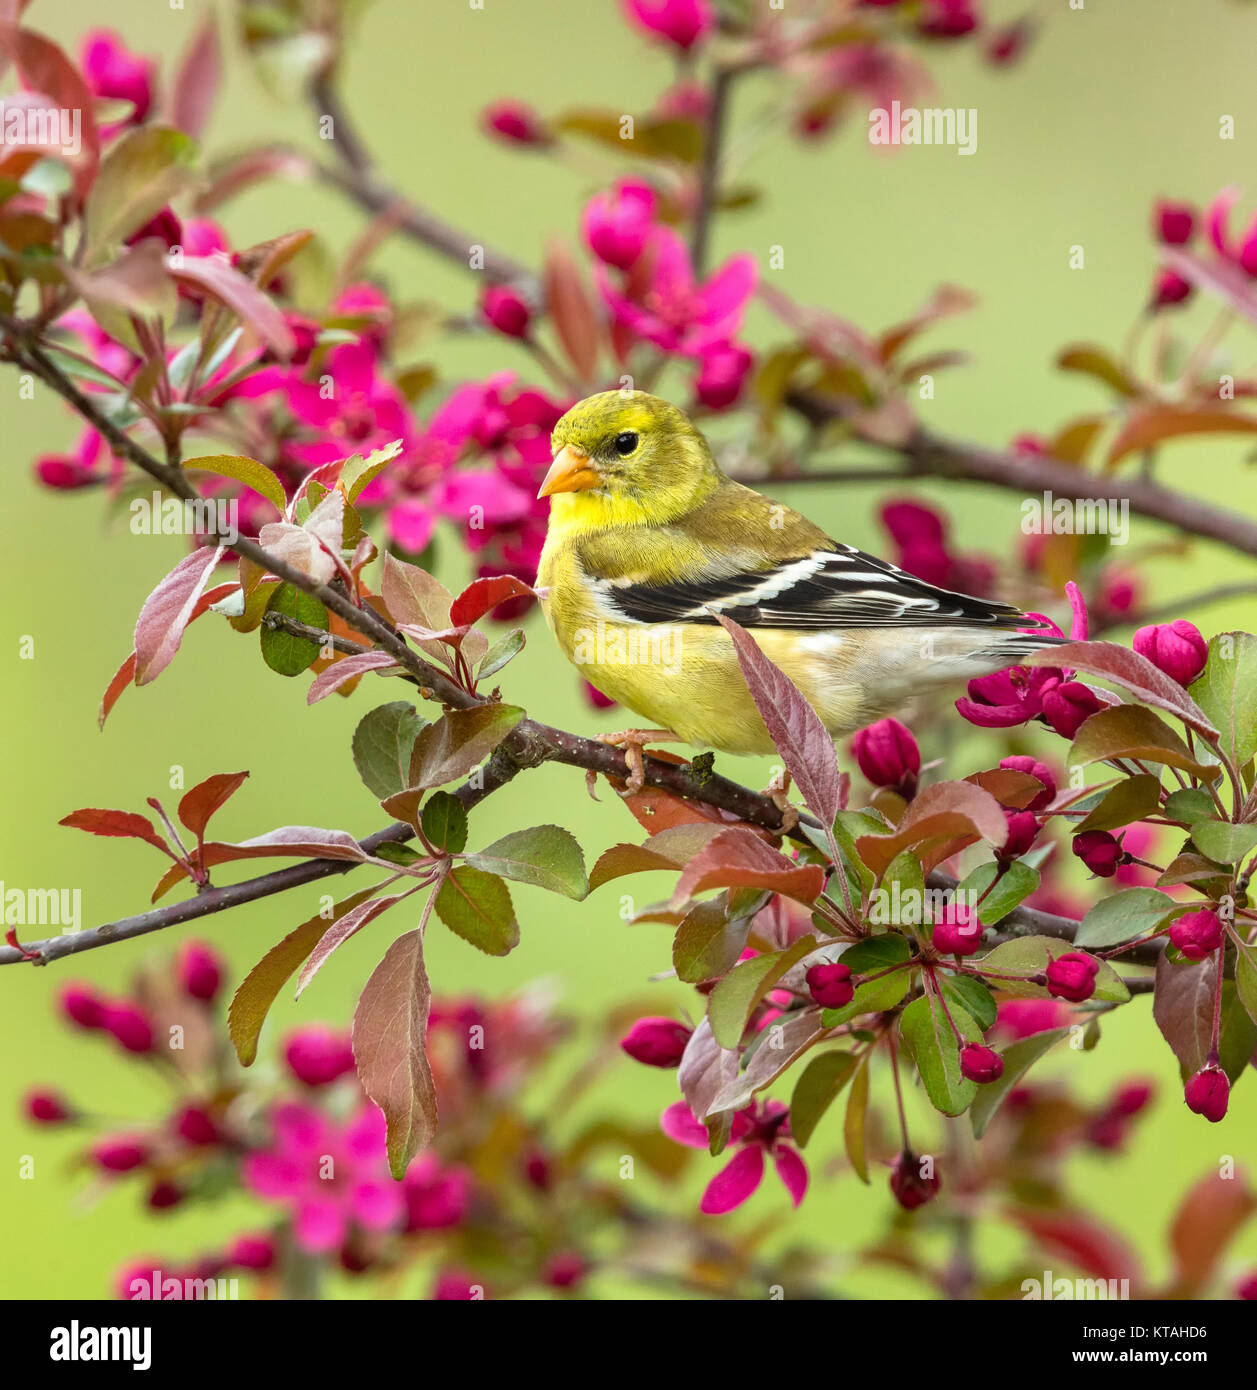 Female American goldfinch perched in a flowering crabapple tree Stock Photo